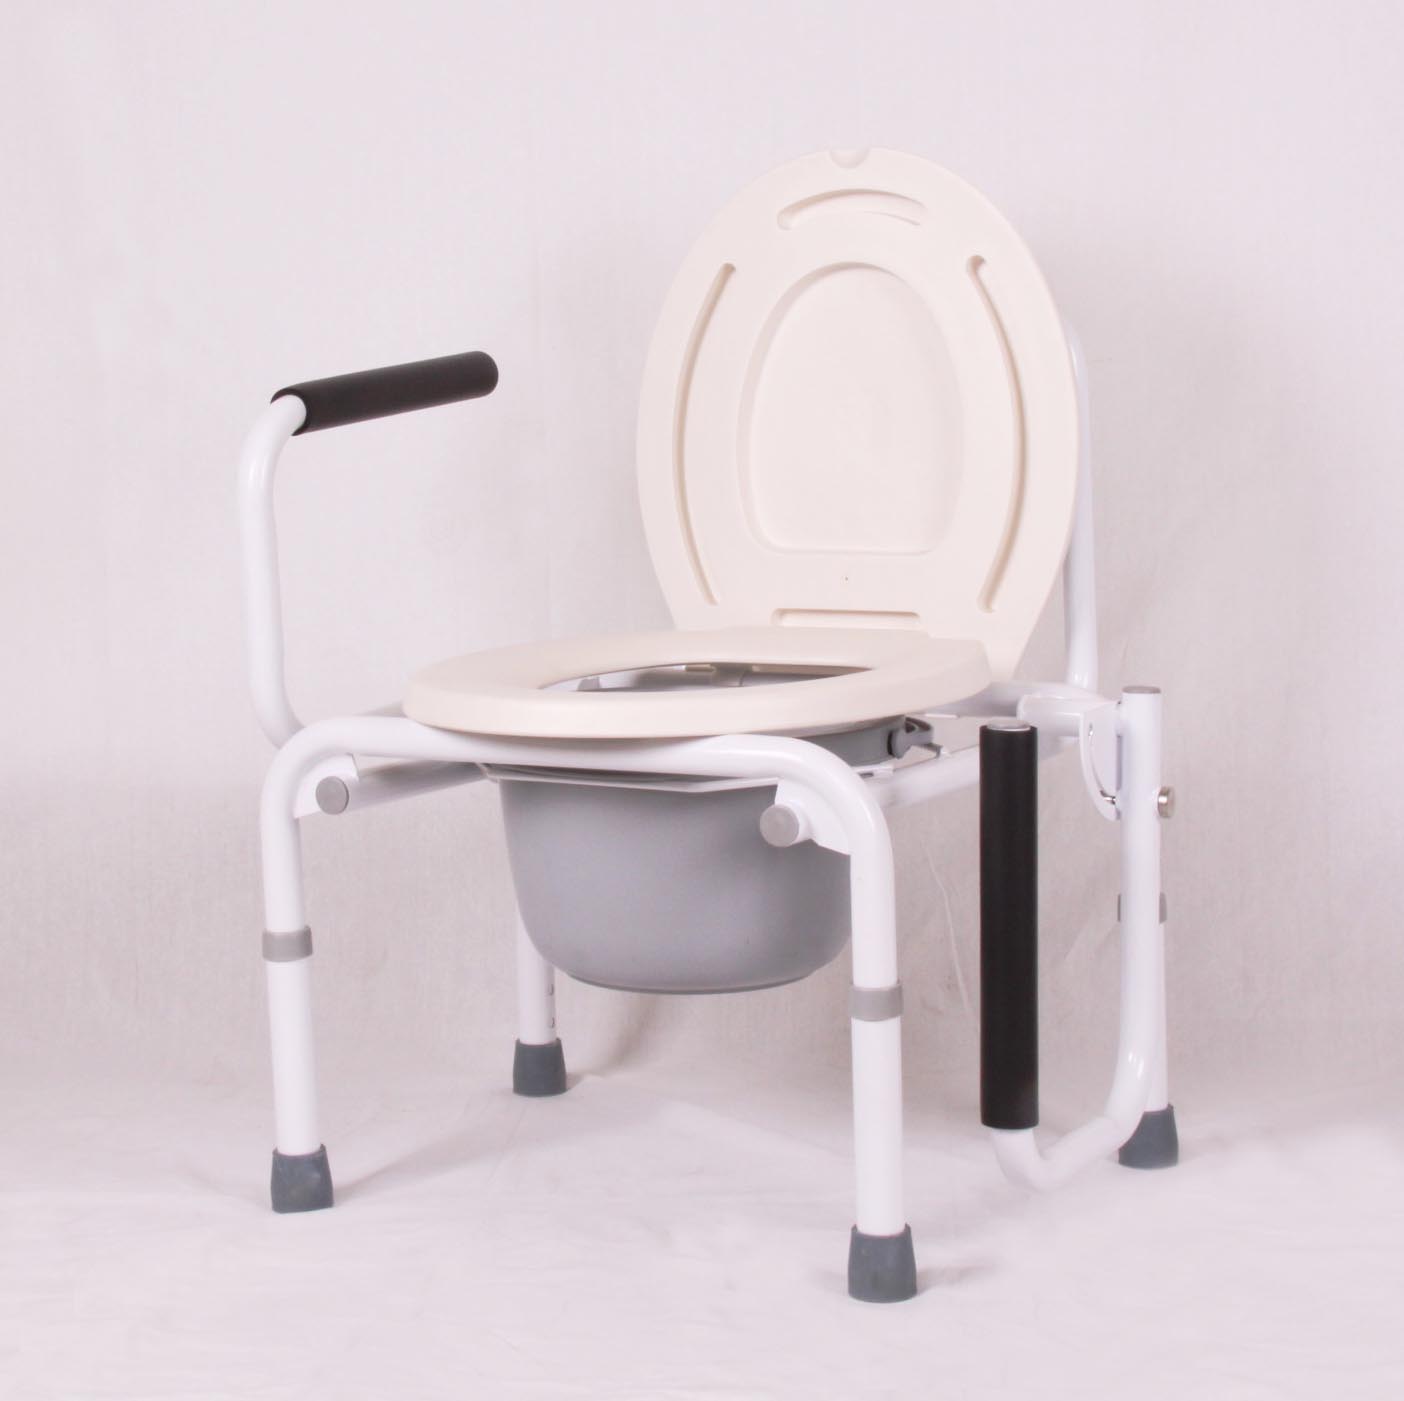 Commode Chair Adjustable (YJ-7600)